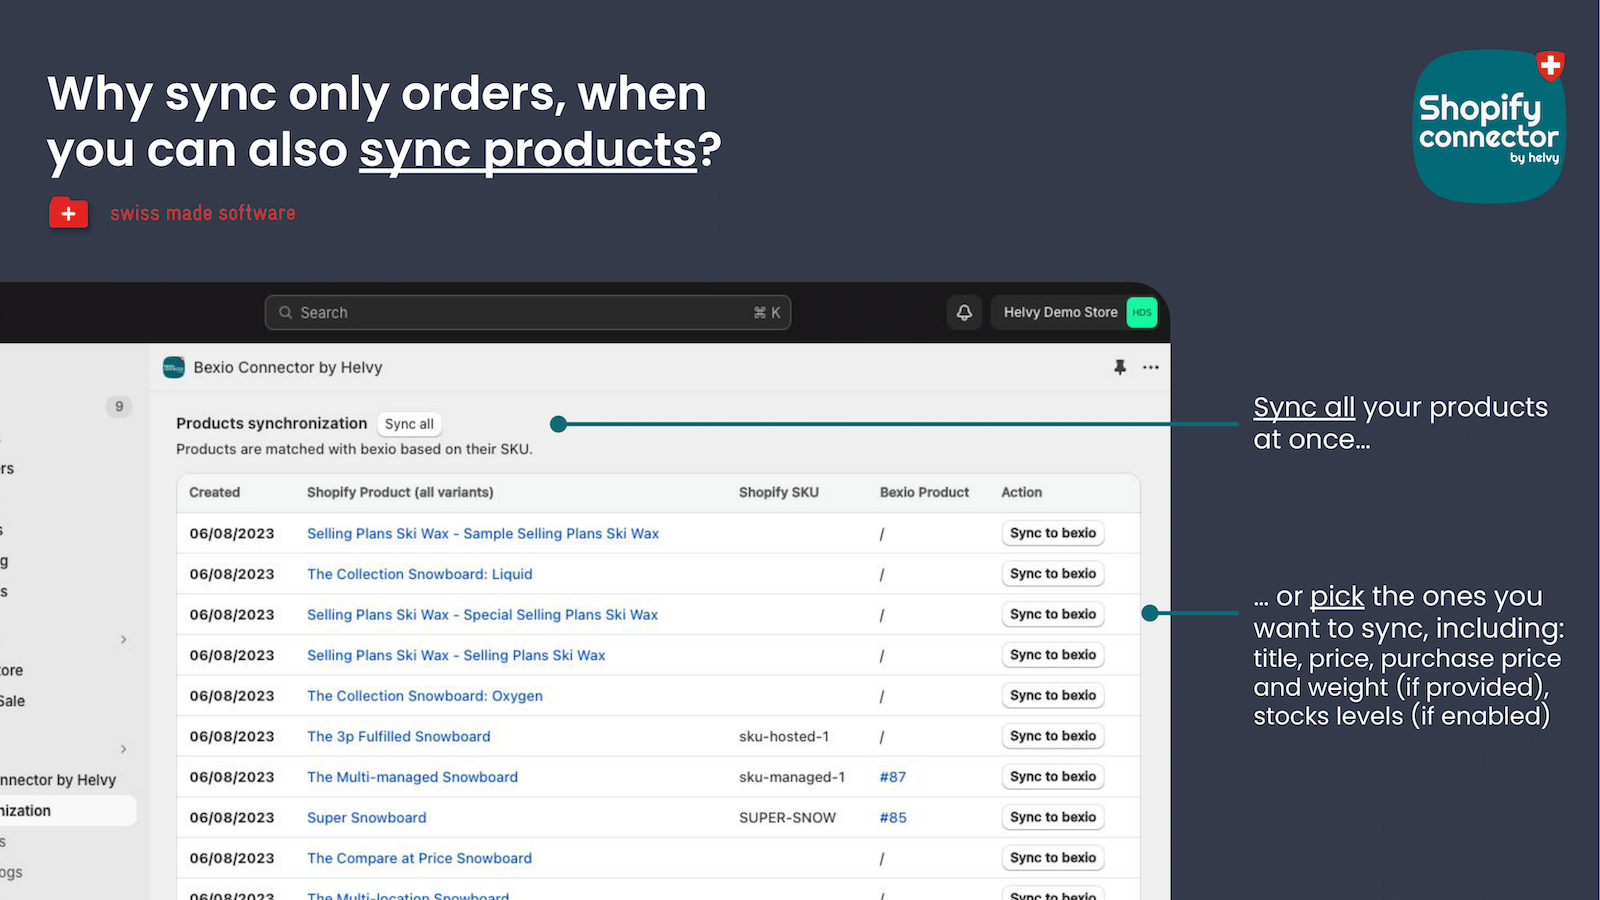 Why sync only orders, when you can also sync products?